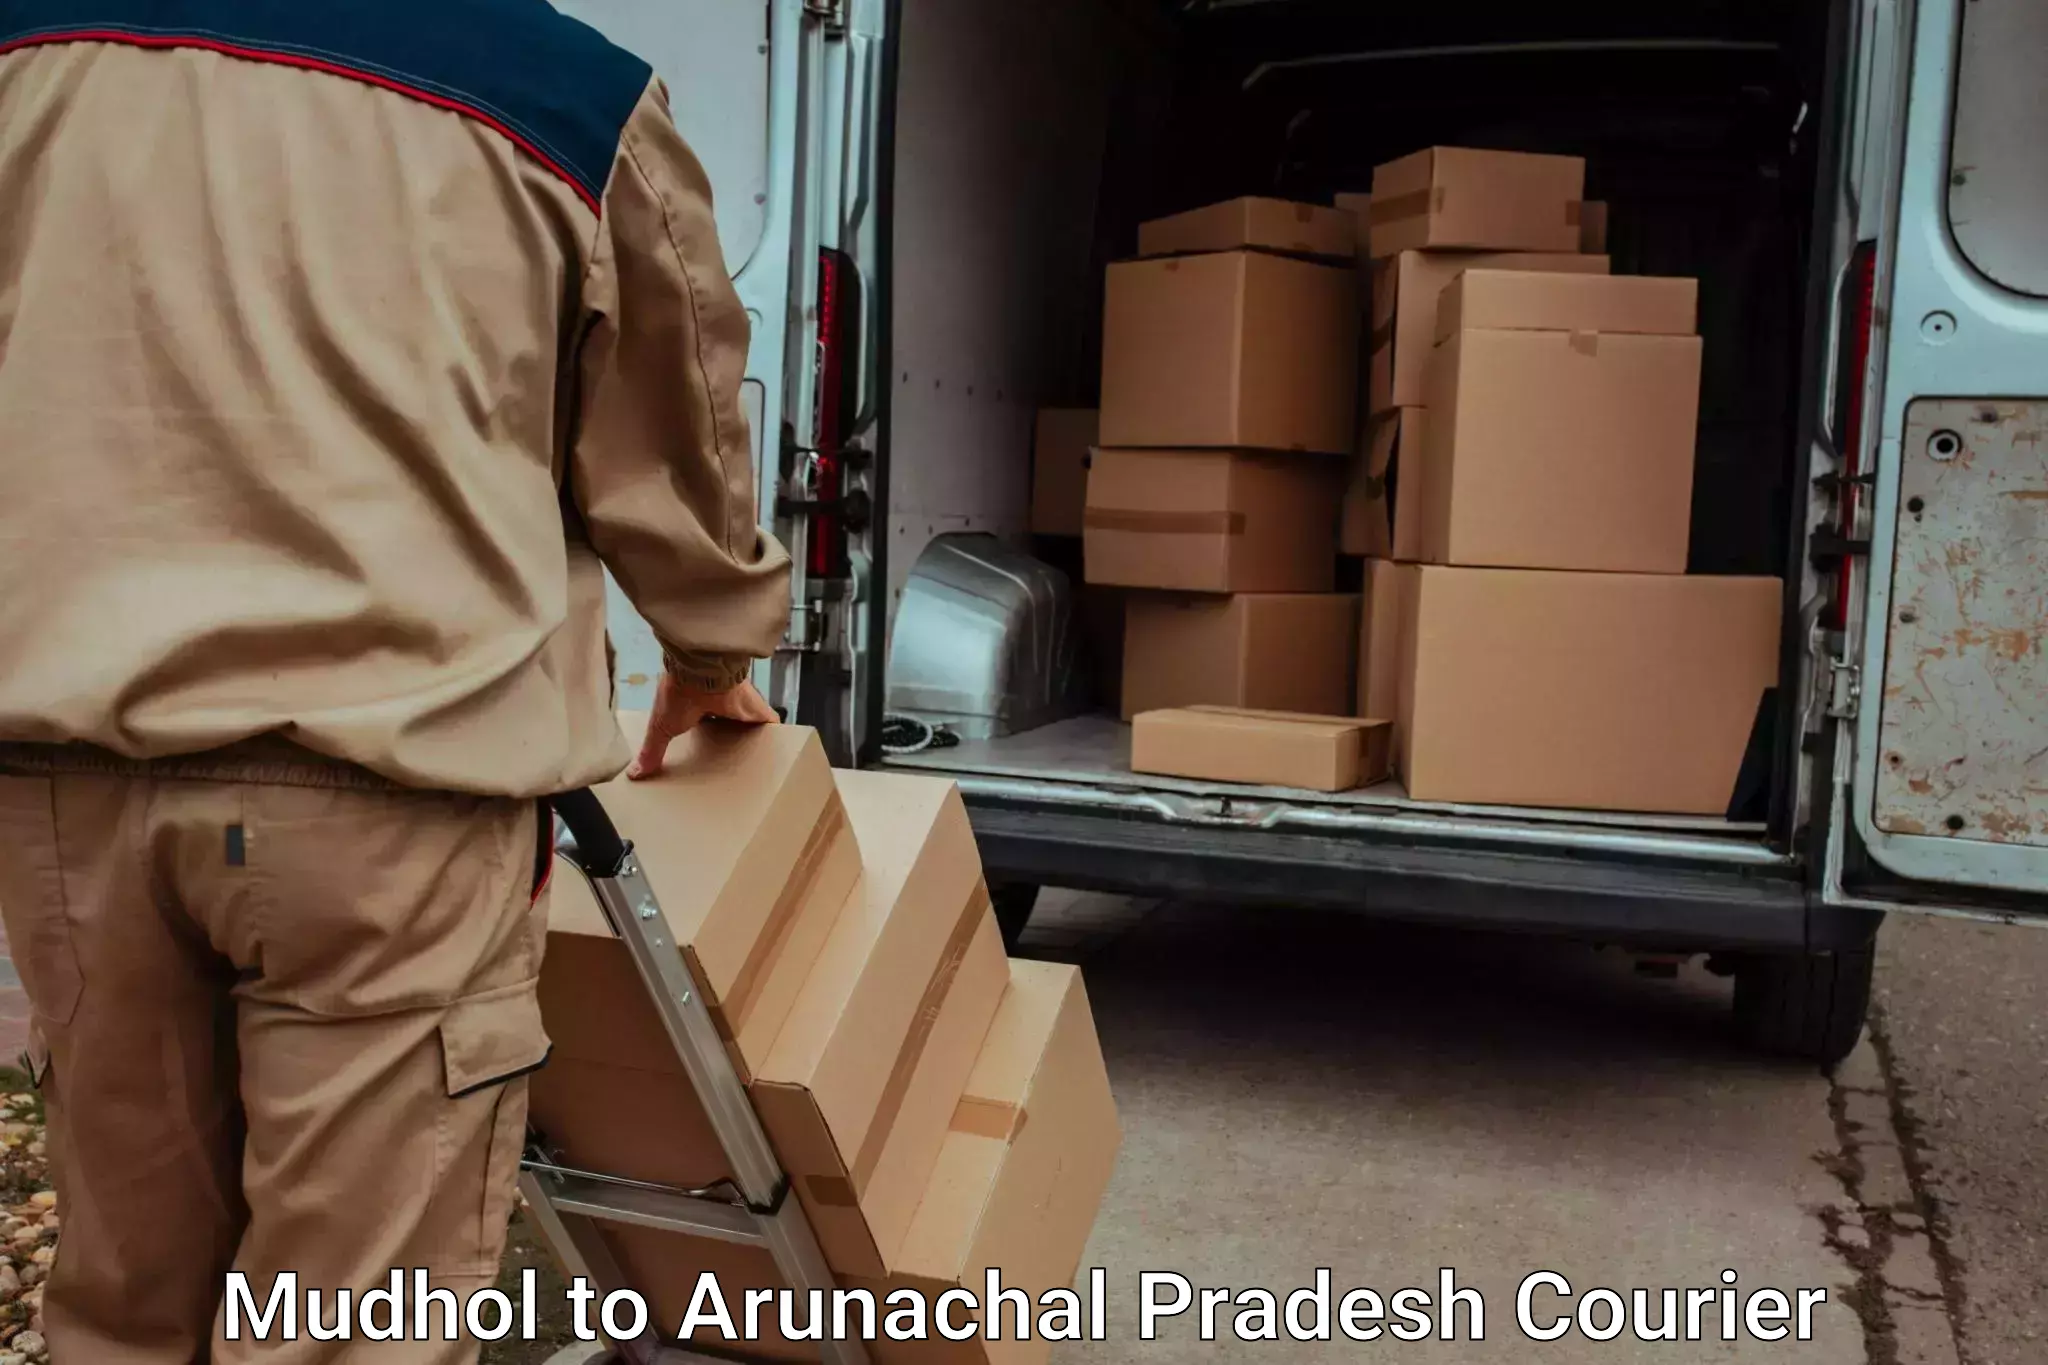 Furniture delivery service Mudhol to Changlang